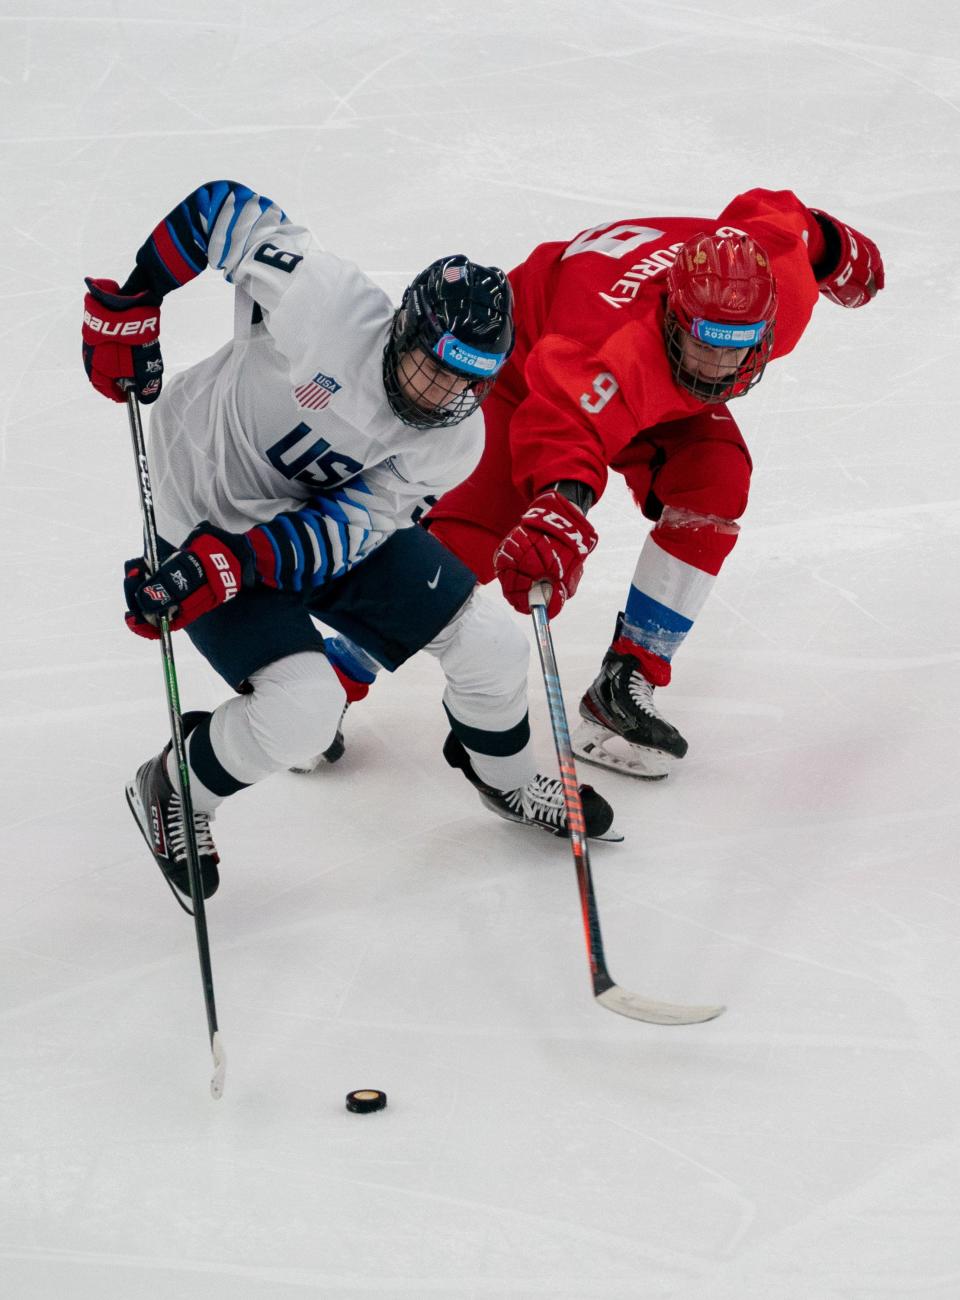 Jan 21, 2020; Lausanne, SWITZERLAND;   
Team USA's Cutter Gauthier carries the puck against Russia's Danil Grigoriev during the Winter Youth Olympic Games on Jan. 21, 2020, in Lausanne, Switzerland.